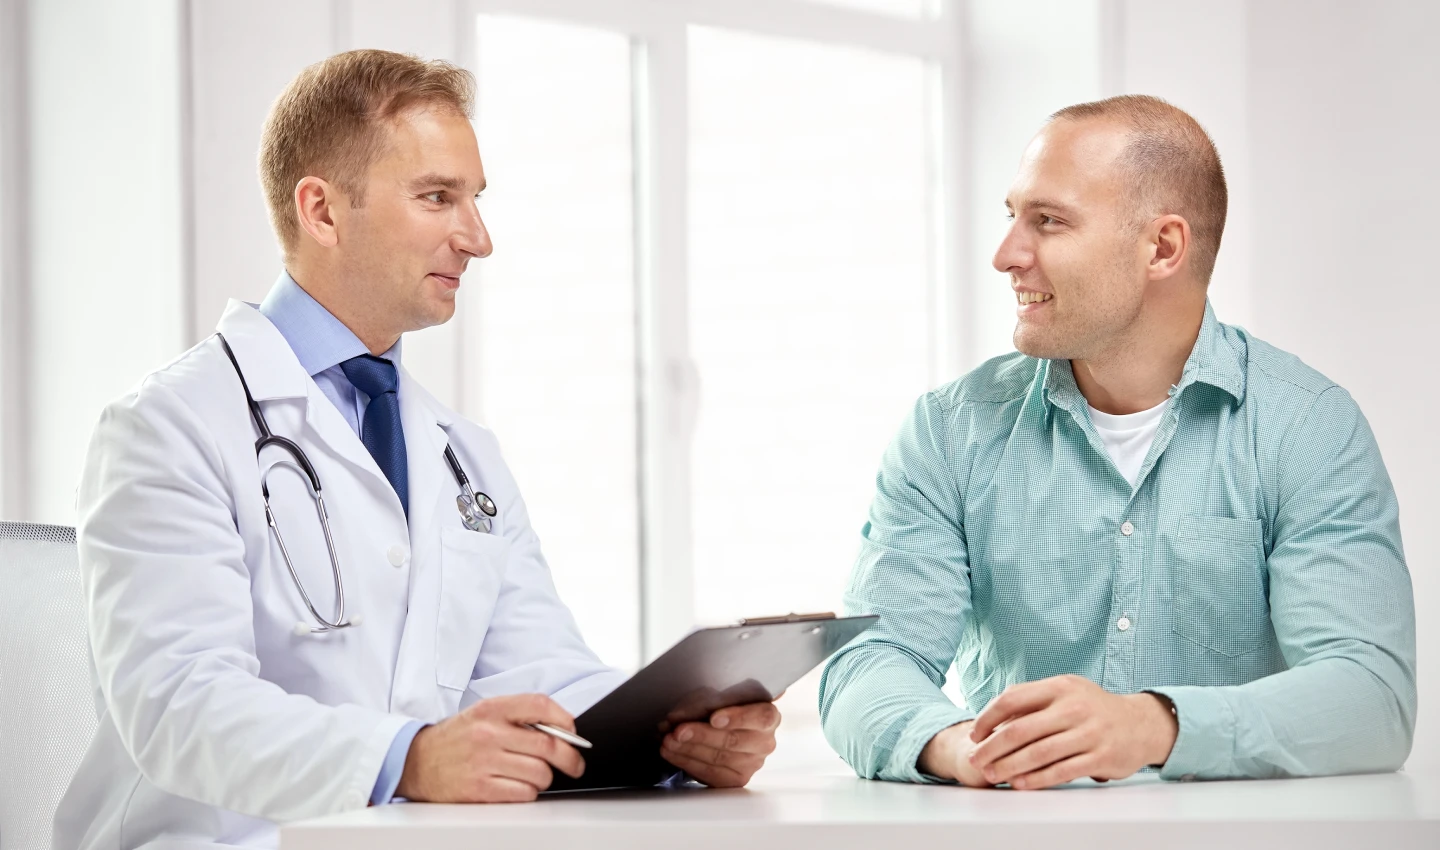 A patient and a doctor sitting in an office discussing financing options for hair restoration.